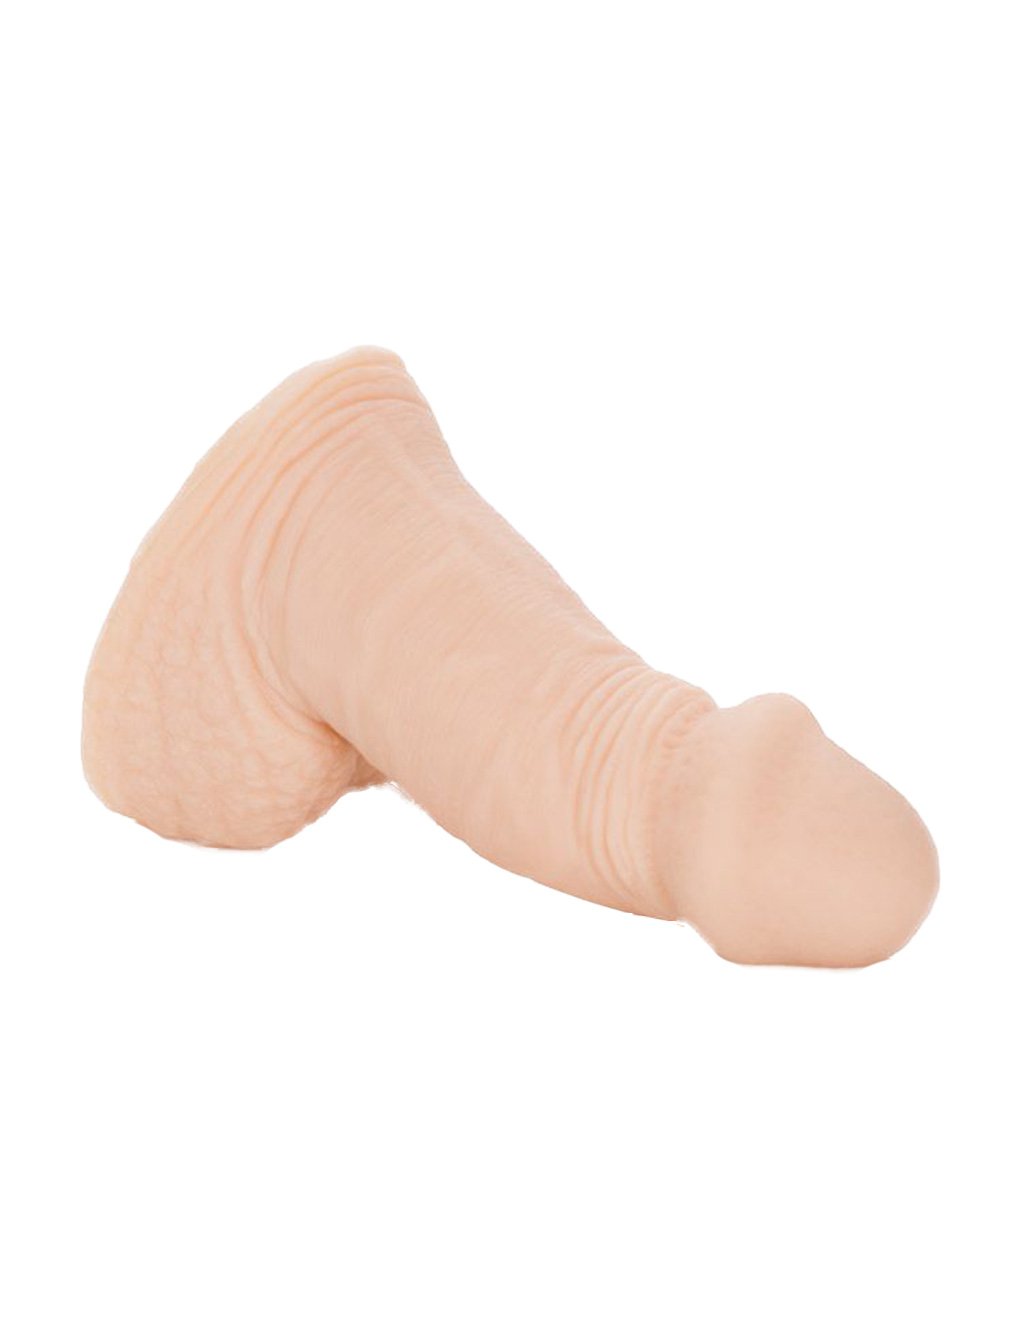 Packer Gear 4 Inch Packing Penis- Ivory- Side